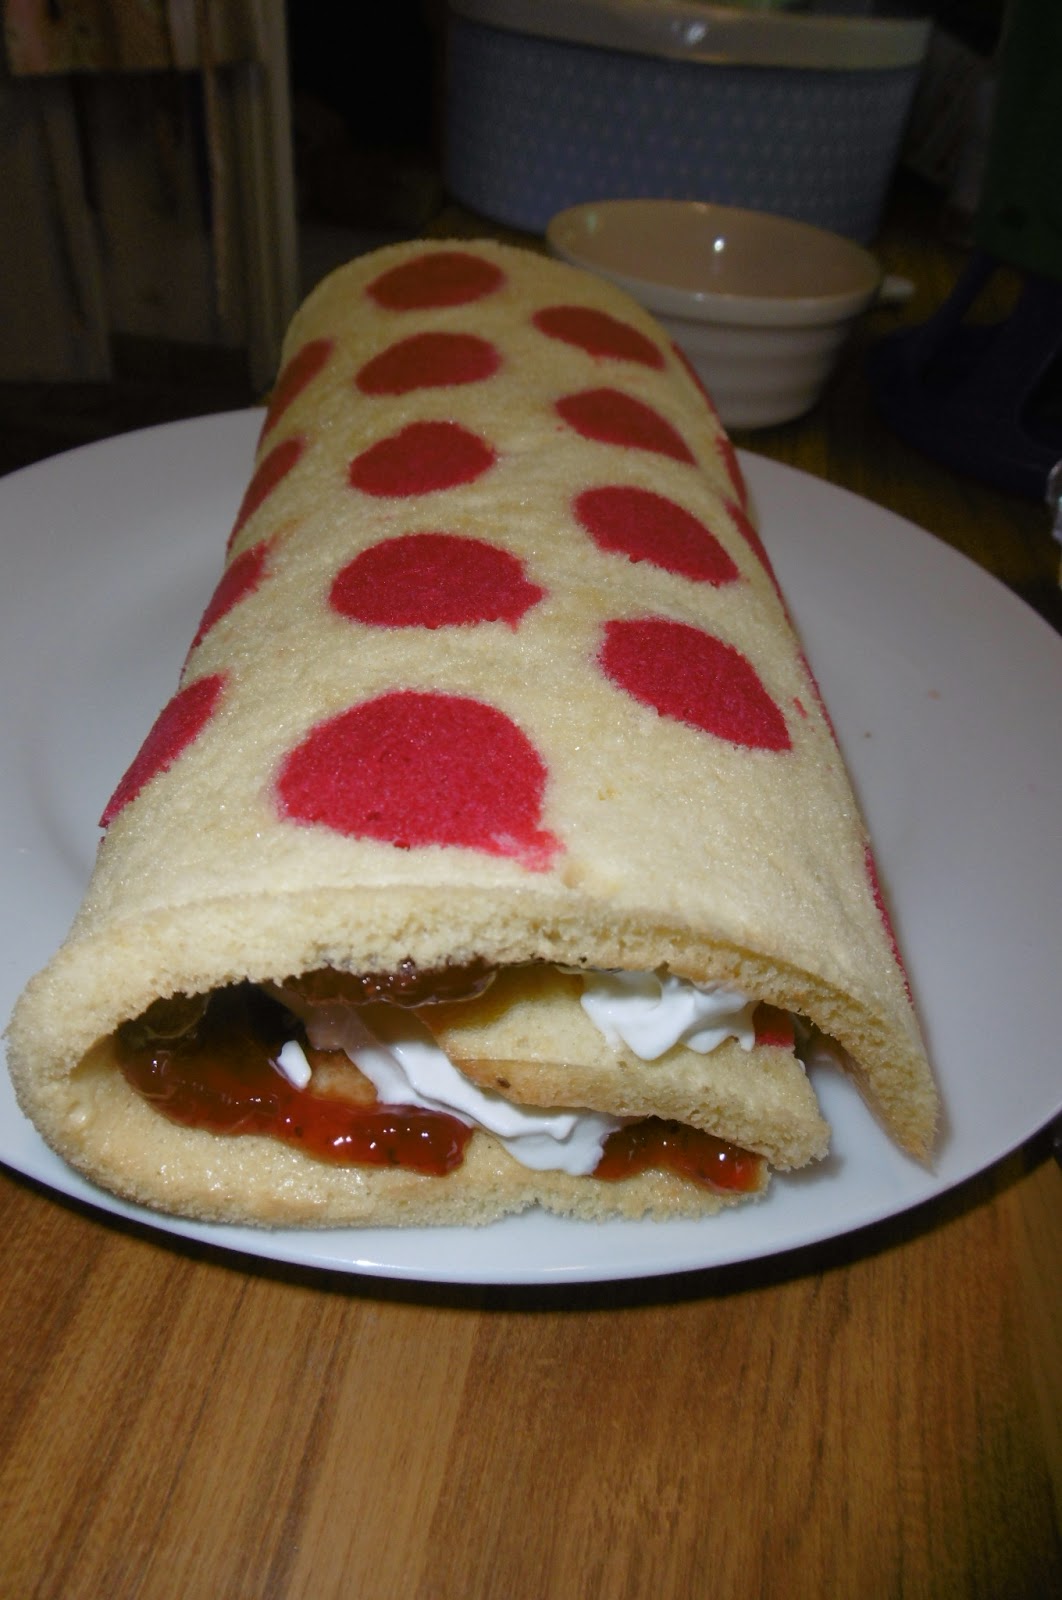 Madhouse Family Reviews: Madhouse recipe : Polka Dot Swiss Roll